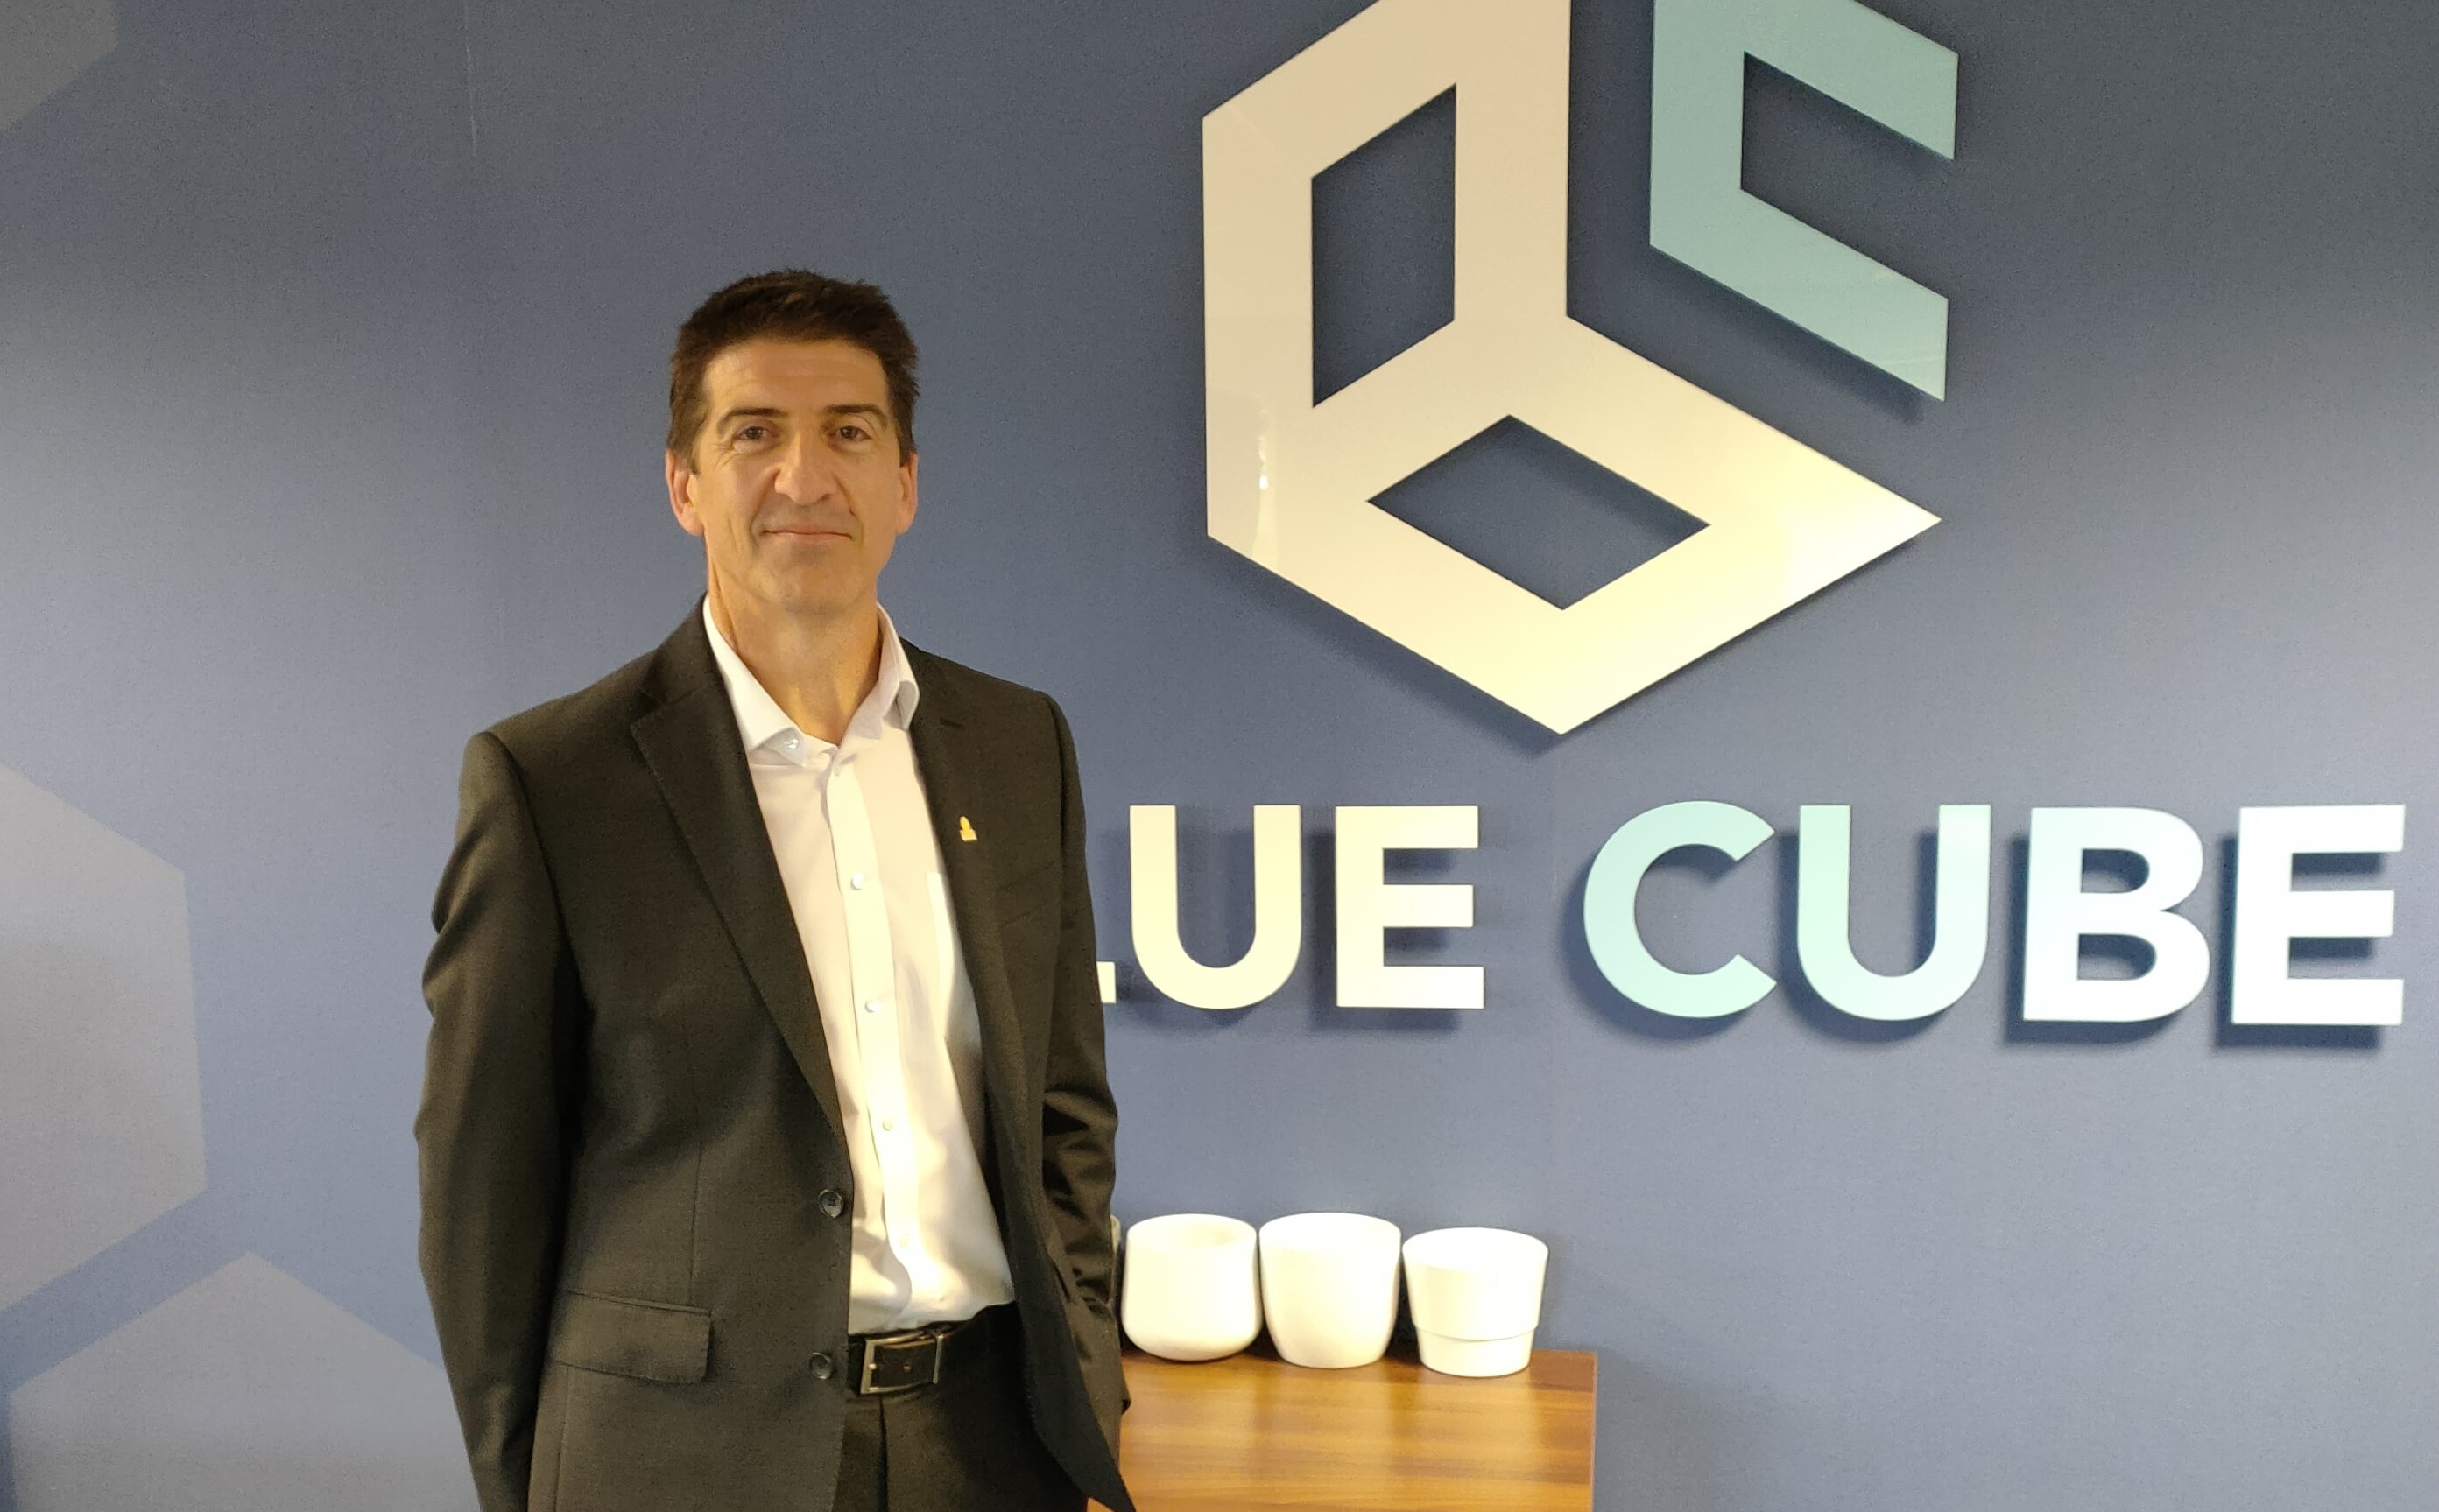 Blue Cube enhances customer support with TNS 365